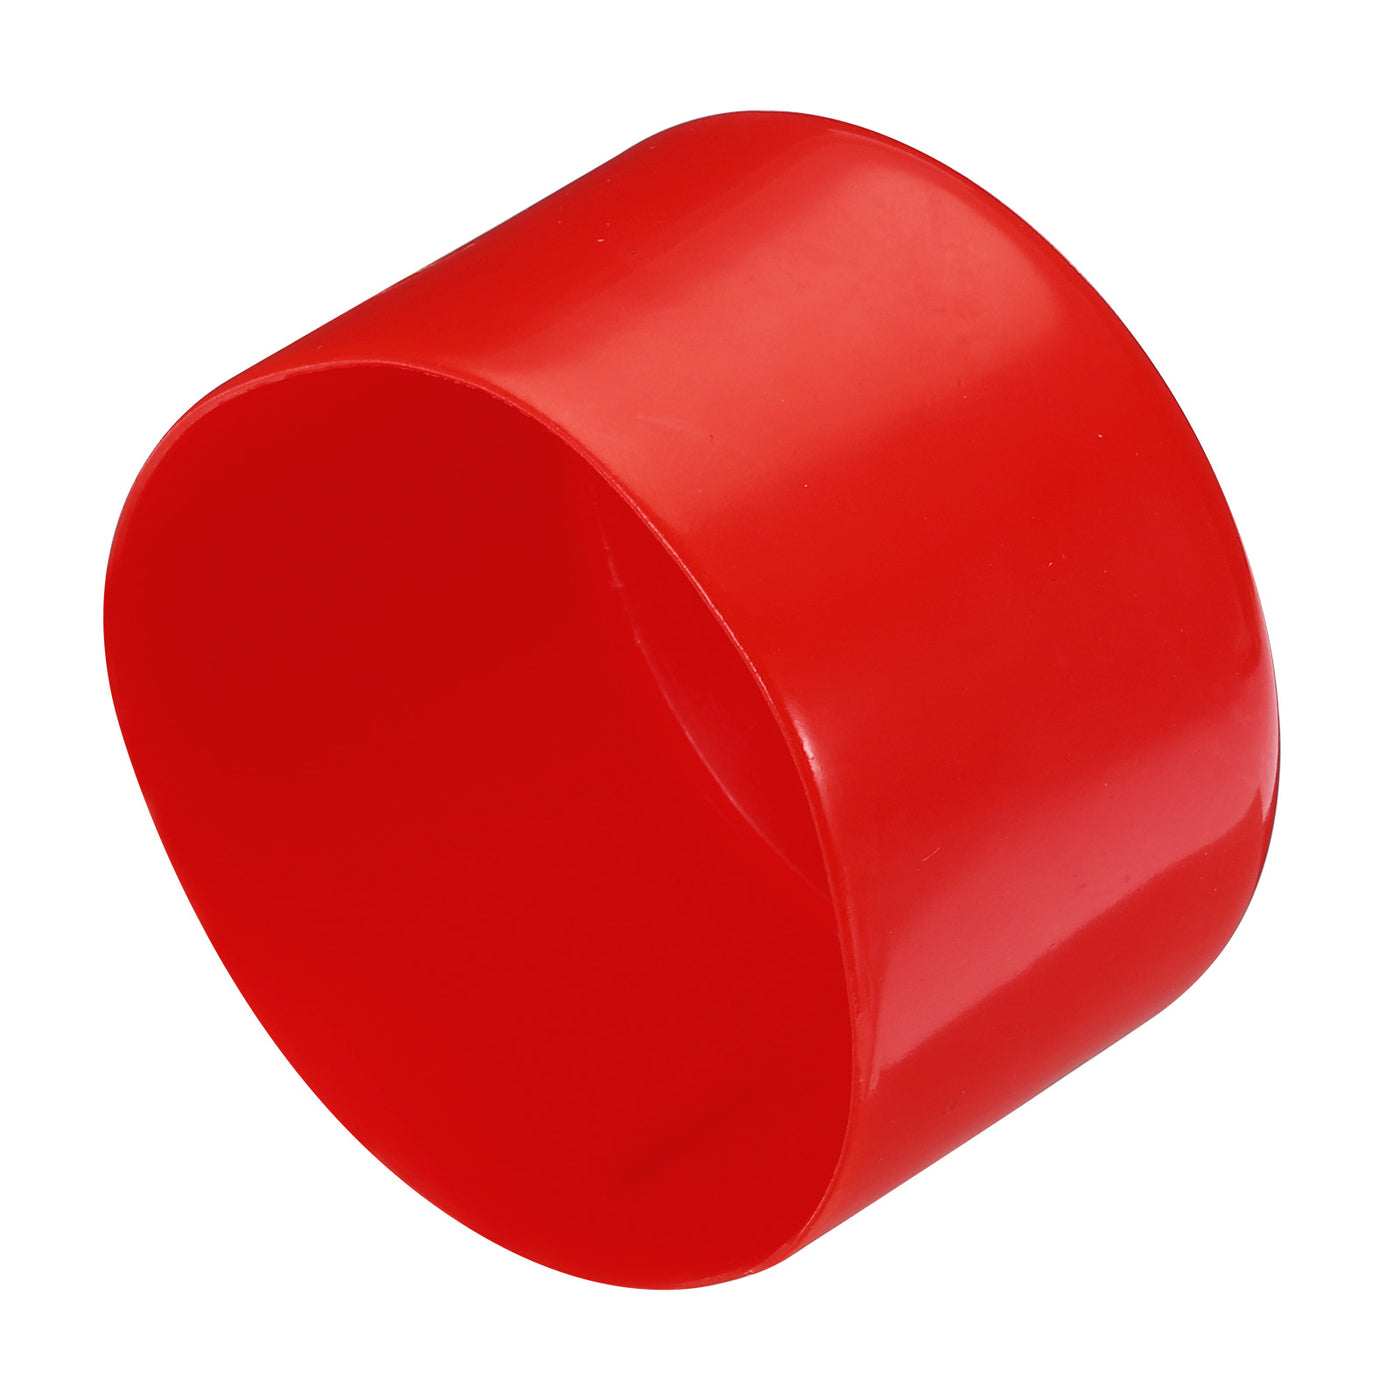 uxcell Uxcell 2pcs Rubber End Caps 75mm ID Vinyl Round Tube Bolt Cap Cover Screw Thread Protectors Red